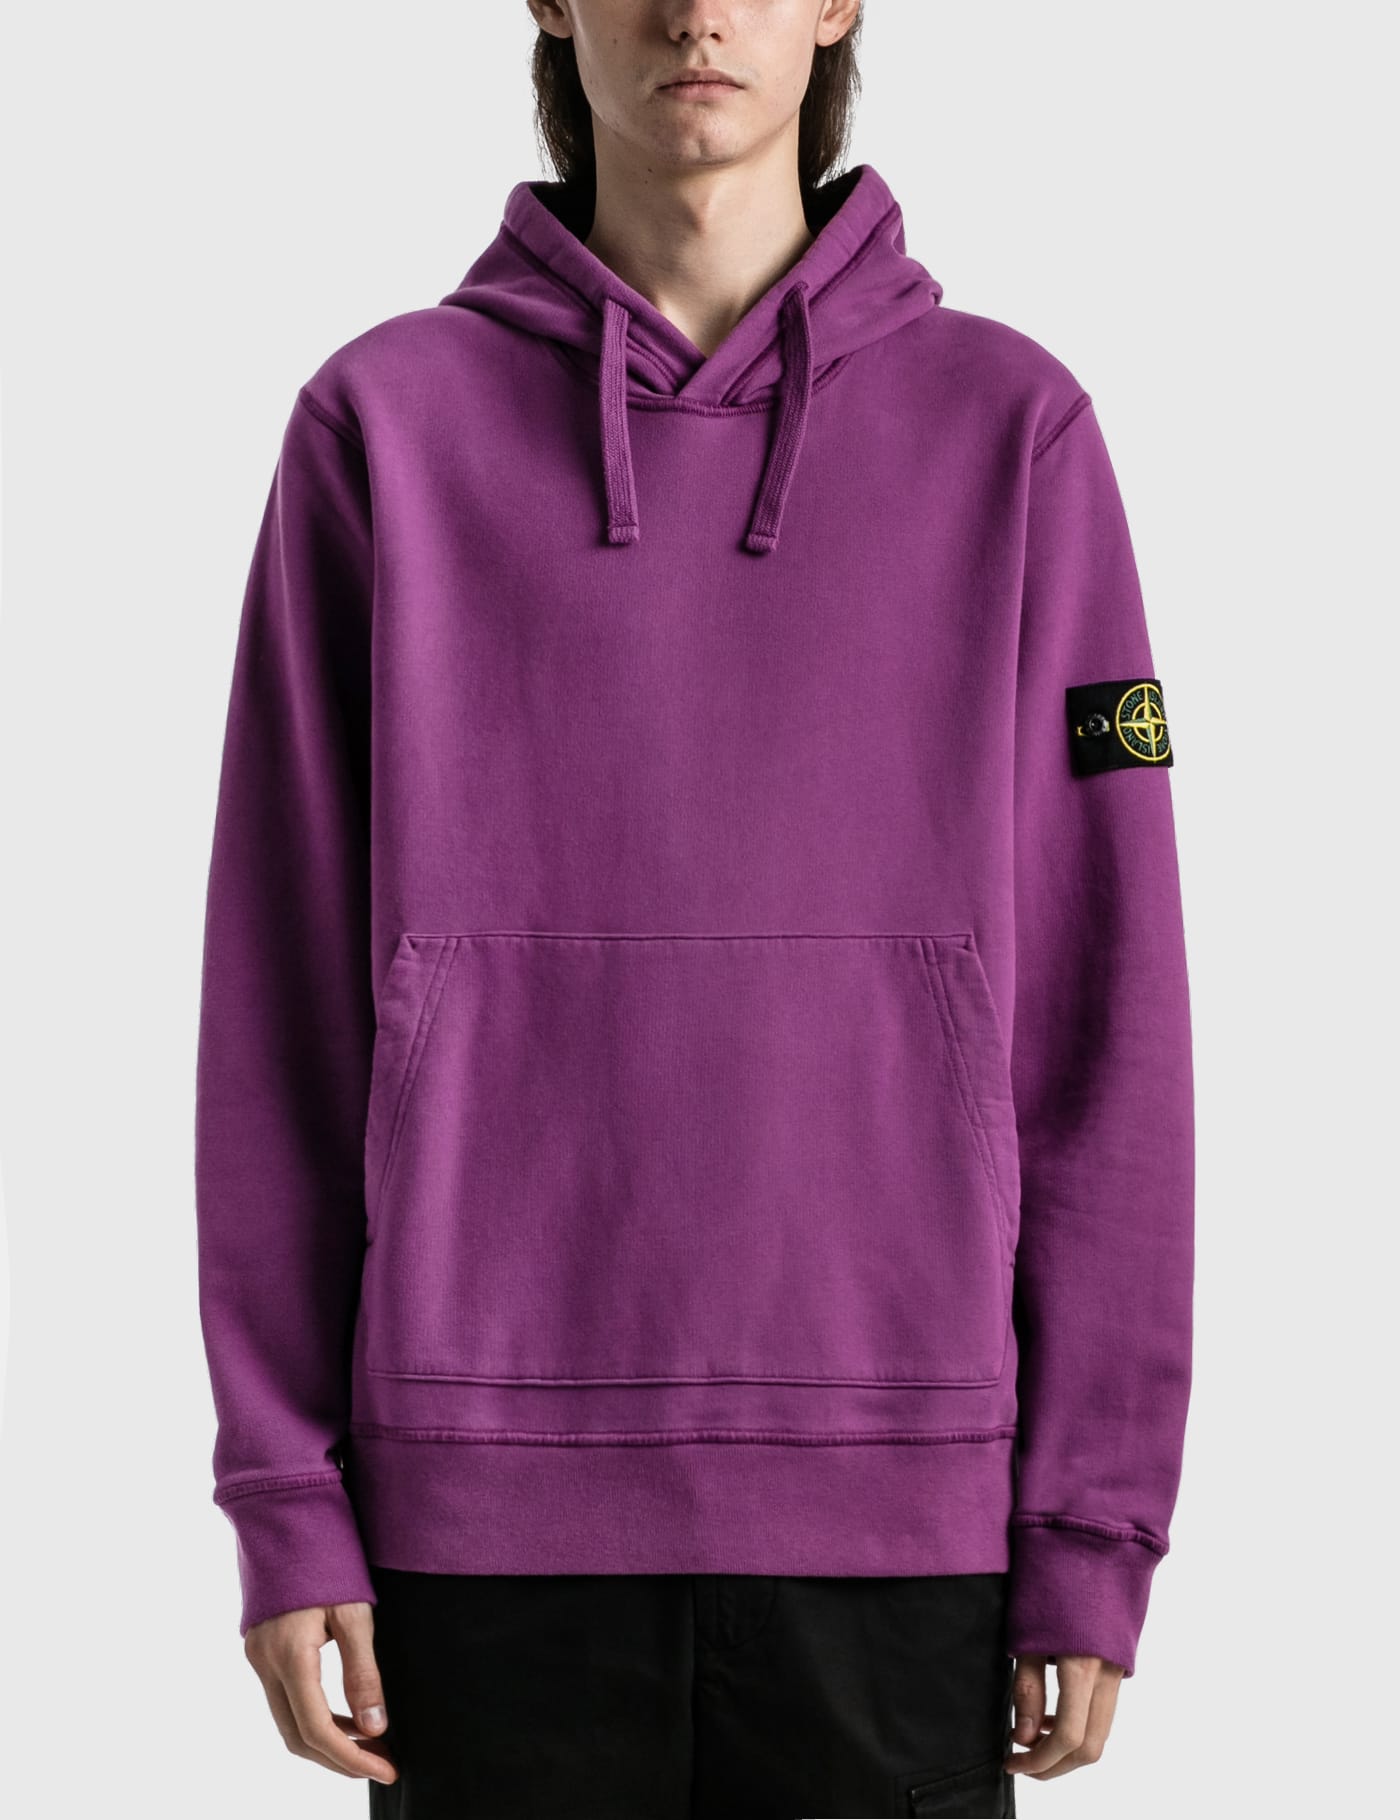 Stone Island - Classic Hoodie | HBX - Globally Curated Fashion and  Lifestyle by Hypebeast